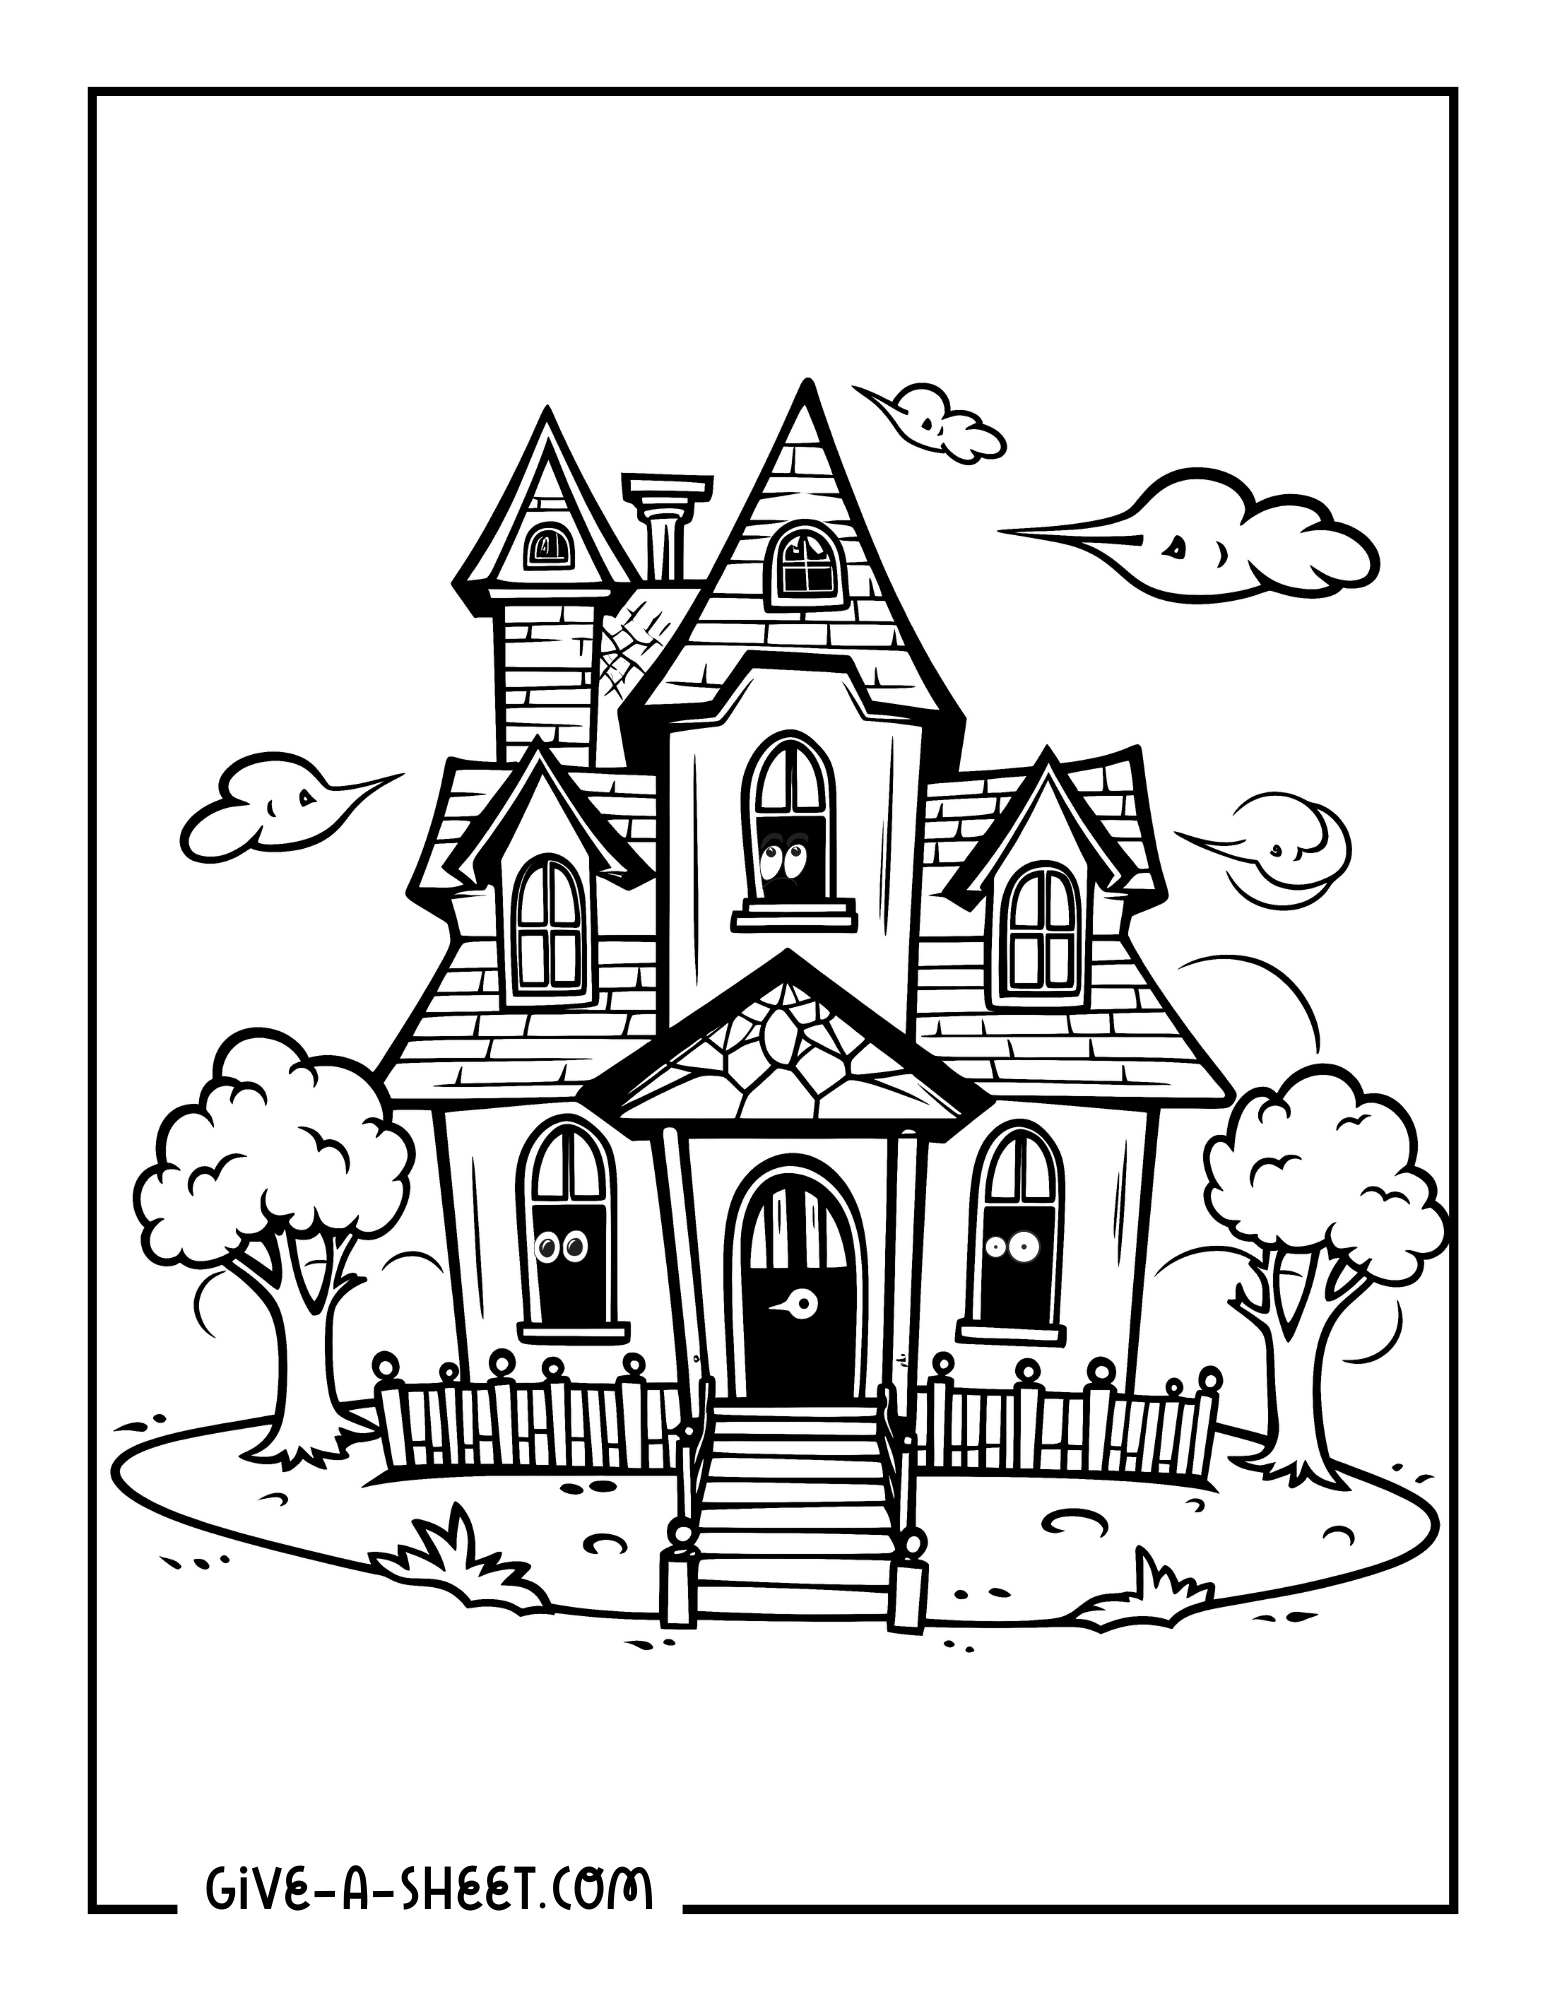 Simple haunted house coloring sheet for kids of all ages.